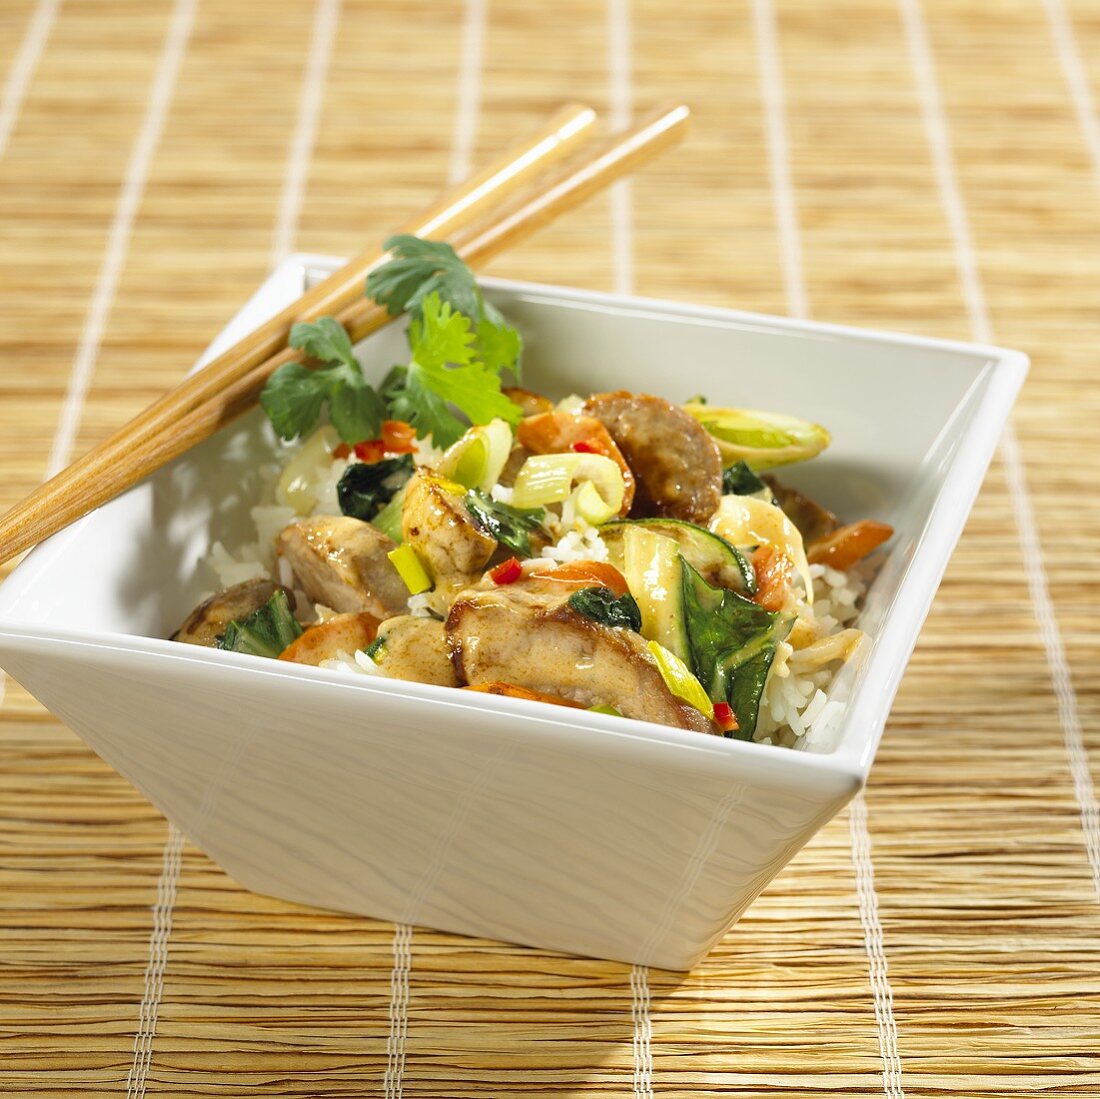 Stir-fried pork and vegetables with coconut sauce on rice